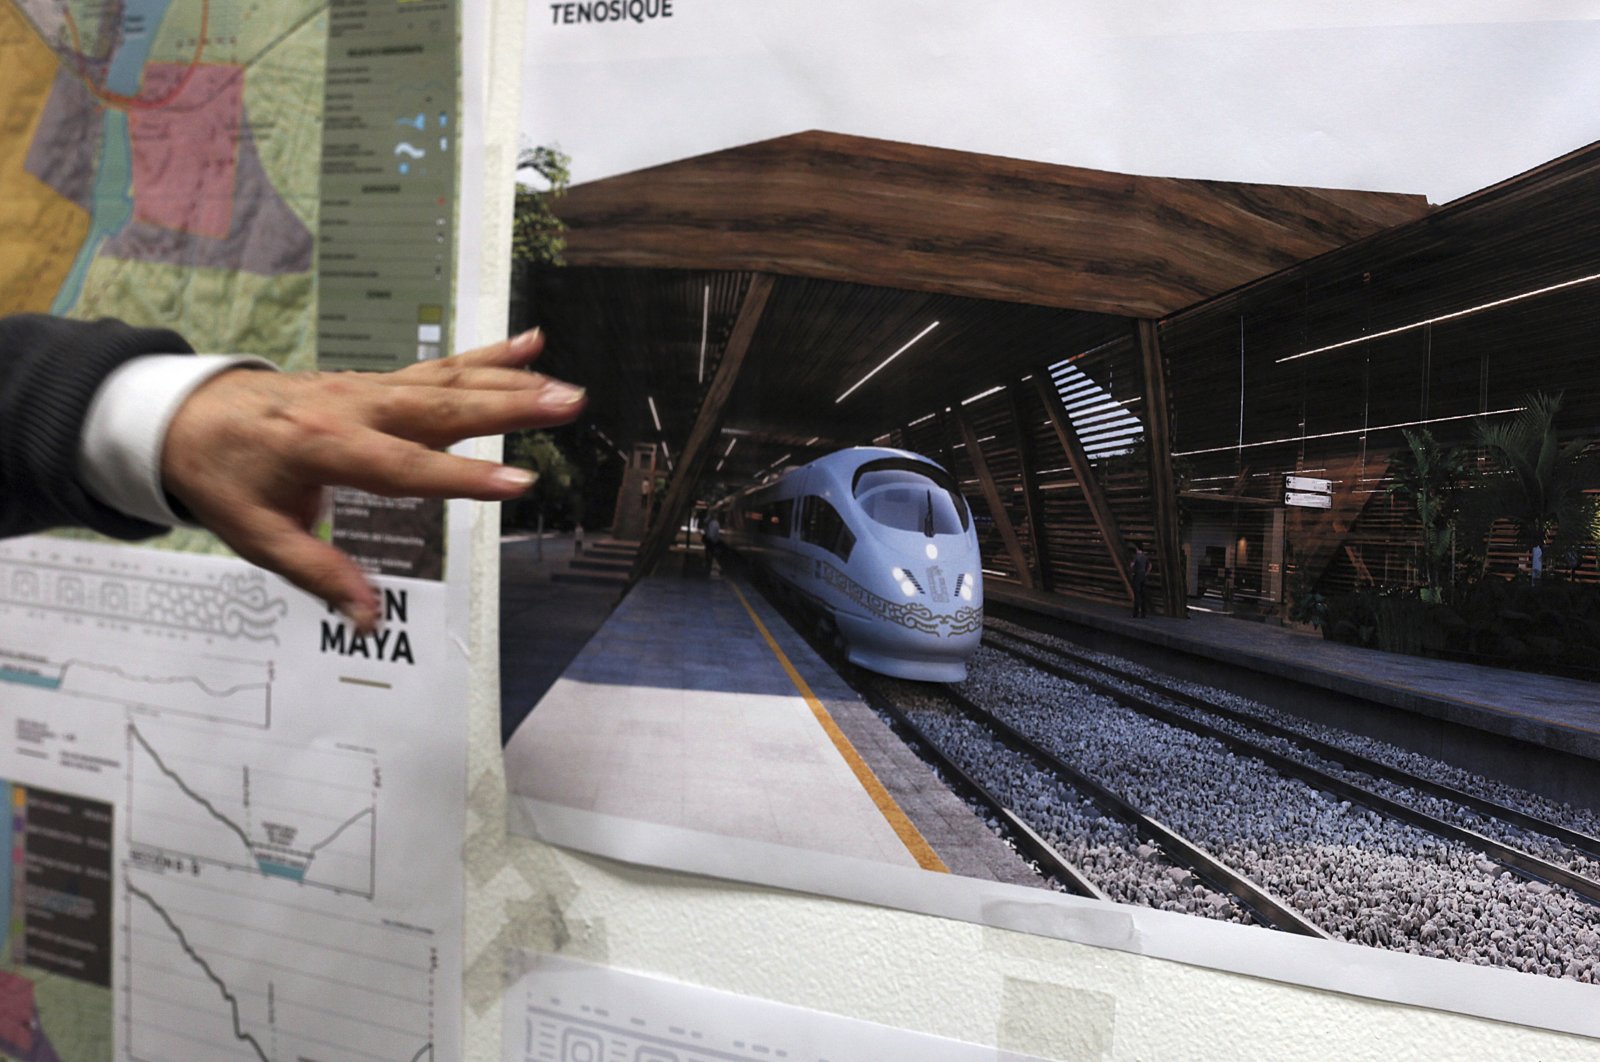 Rogelio Jiménez Pons, director of Fonatur, points to photos of a planned train through the Yucatan Peninsula, during an interview in Mexico City, Mexico, March 18, 2019. (AP Photo)